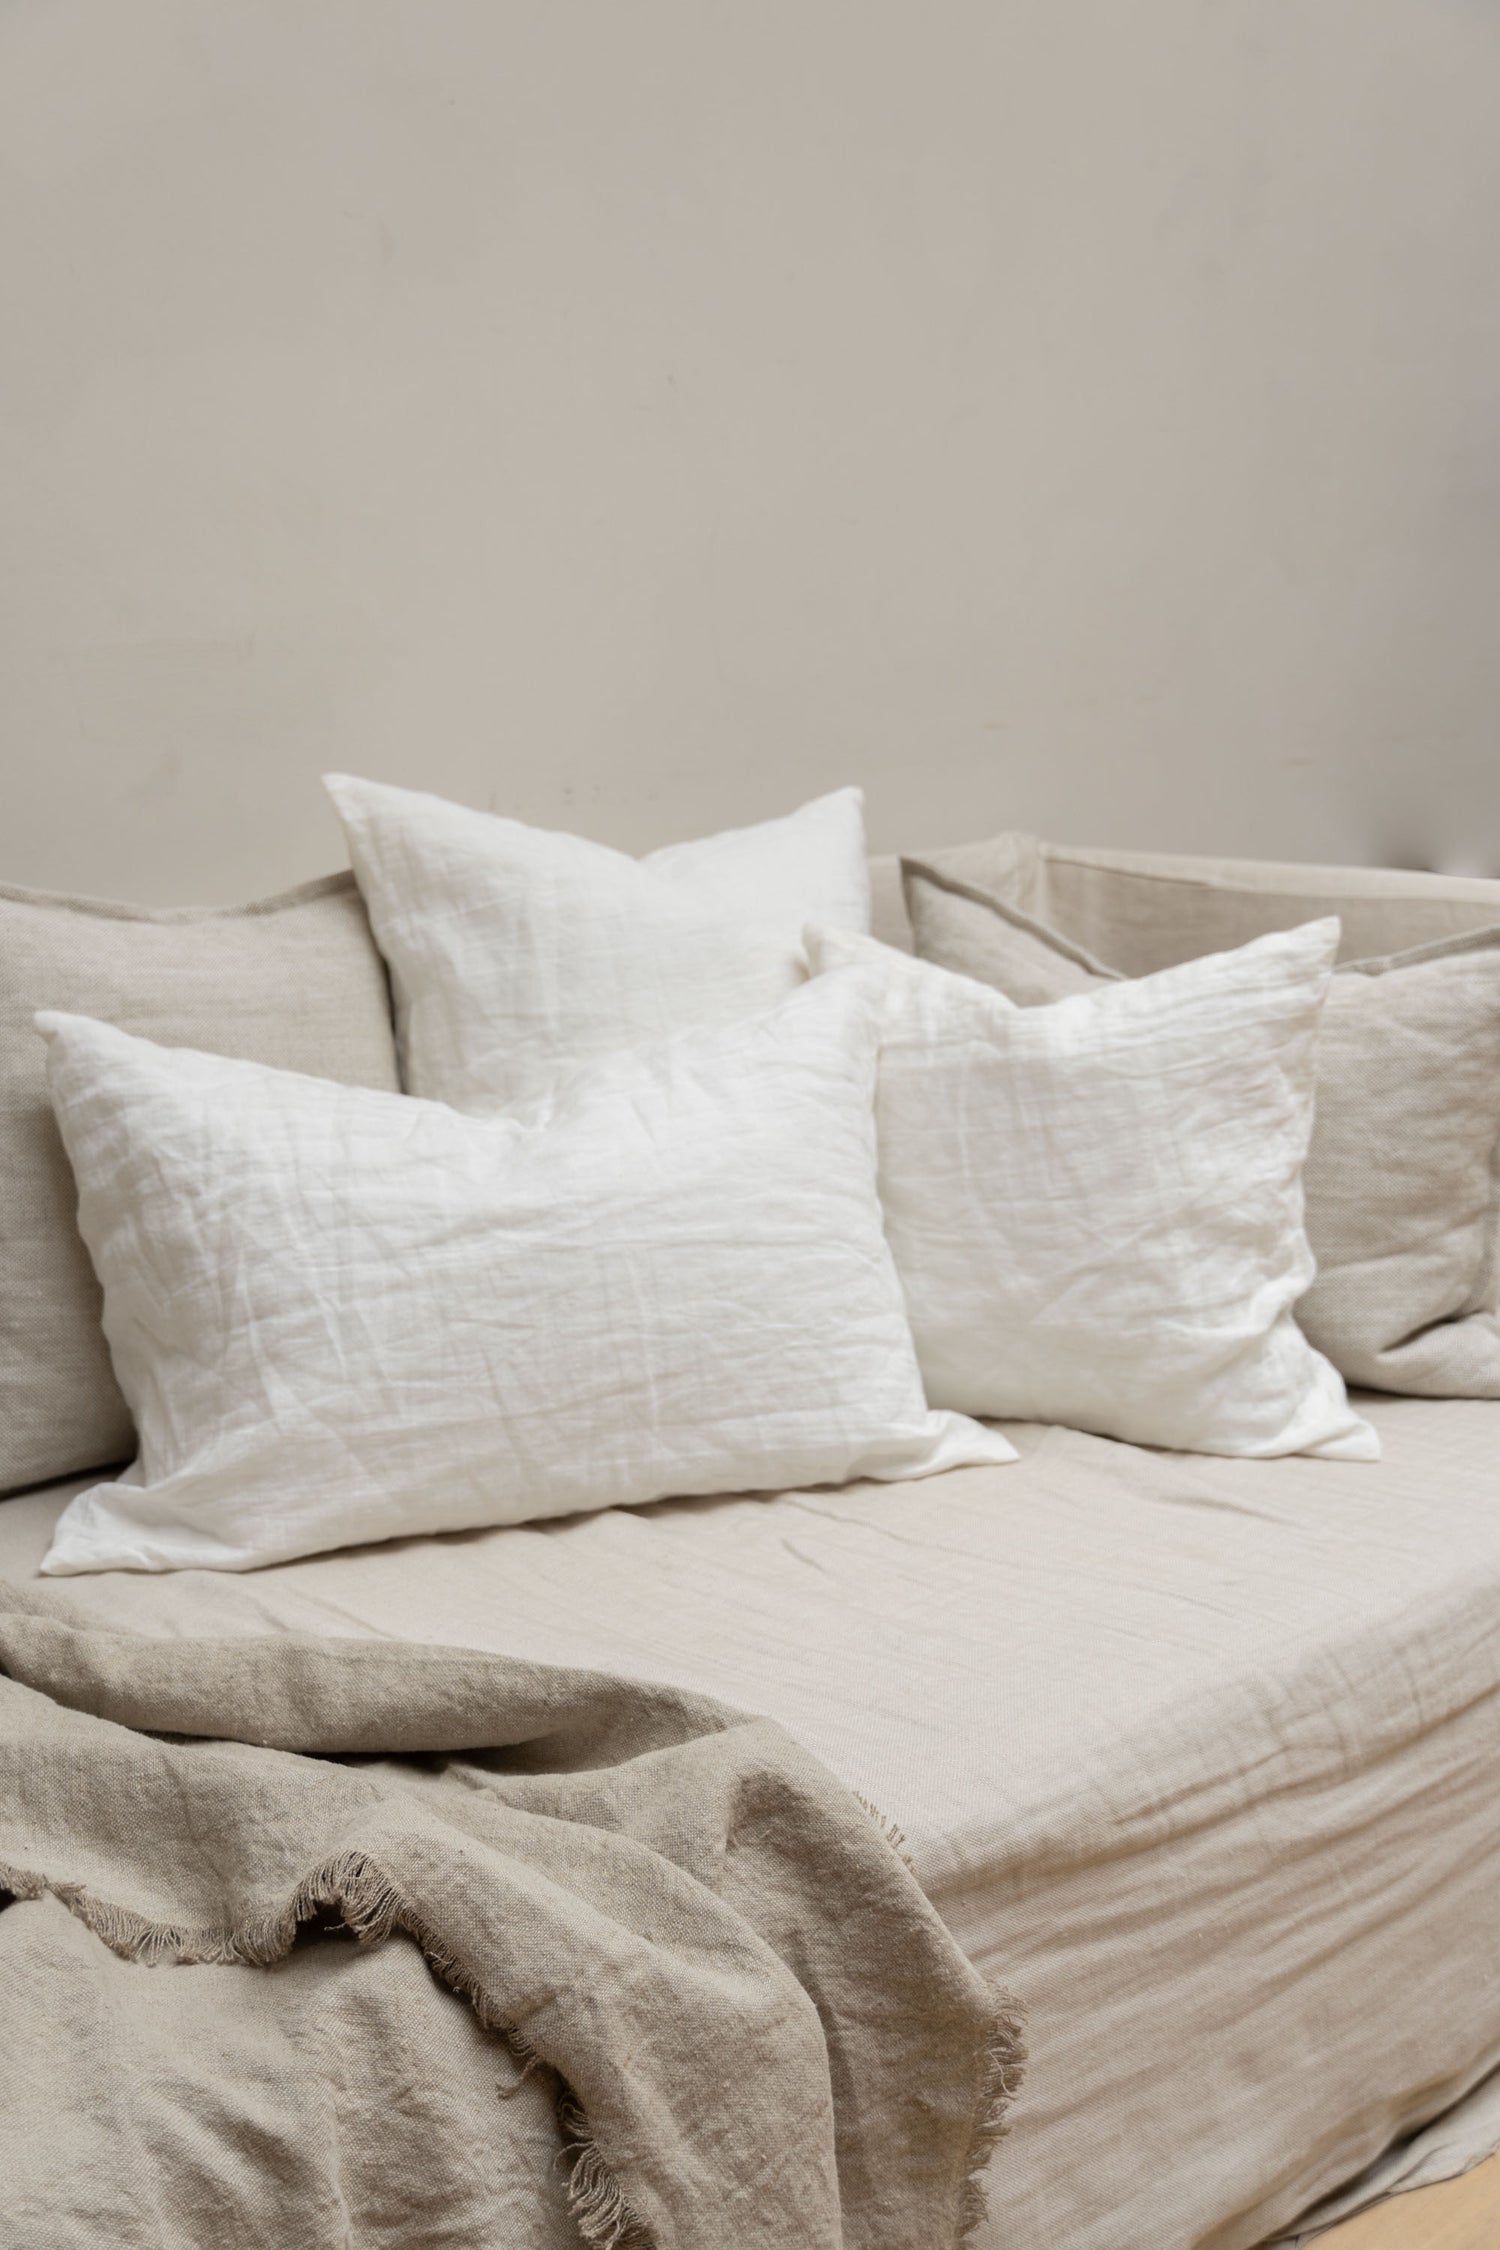 Linen Cushions by Timeless Linen in Off White set on couch in a light and neutral interior at Enter The Loft.